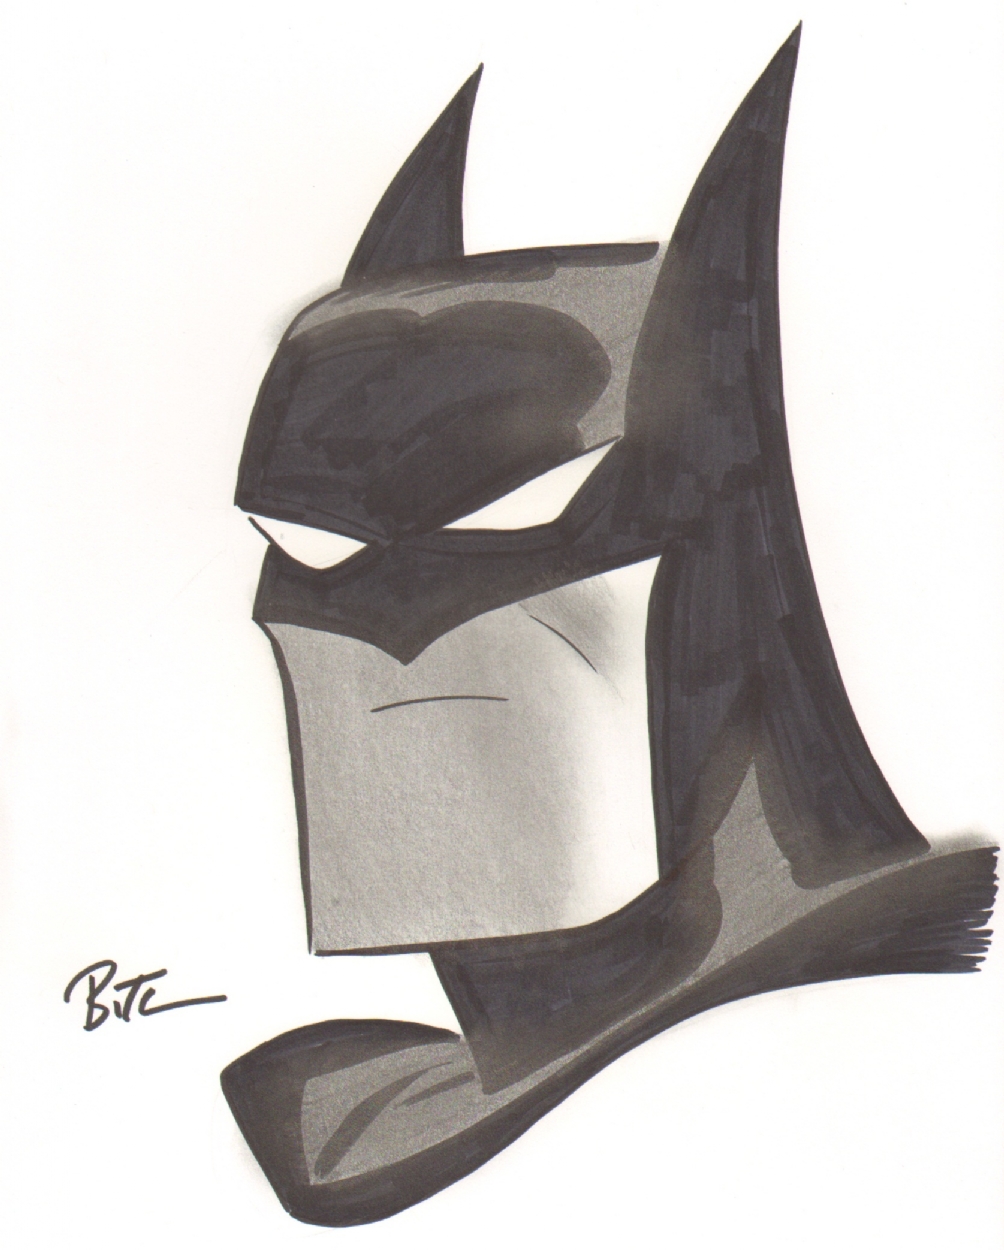 Batman Drawing Reference and Sketches for Artists